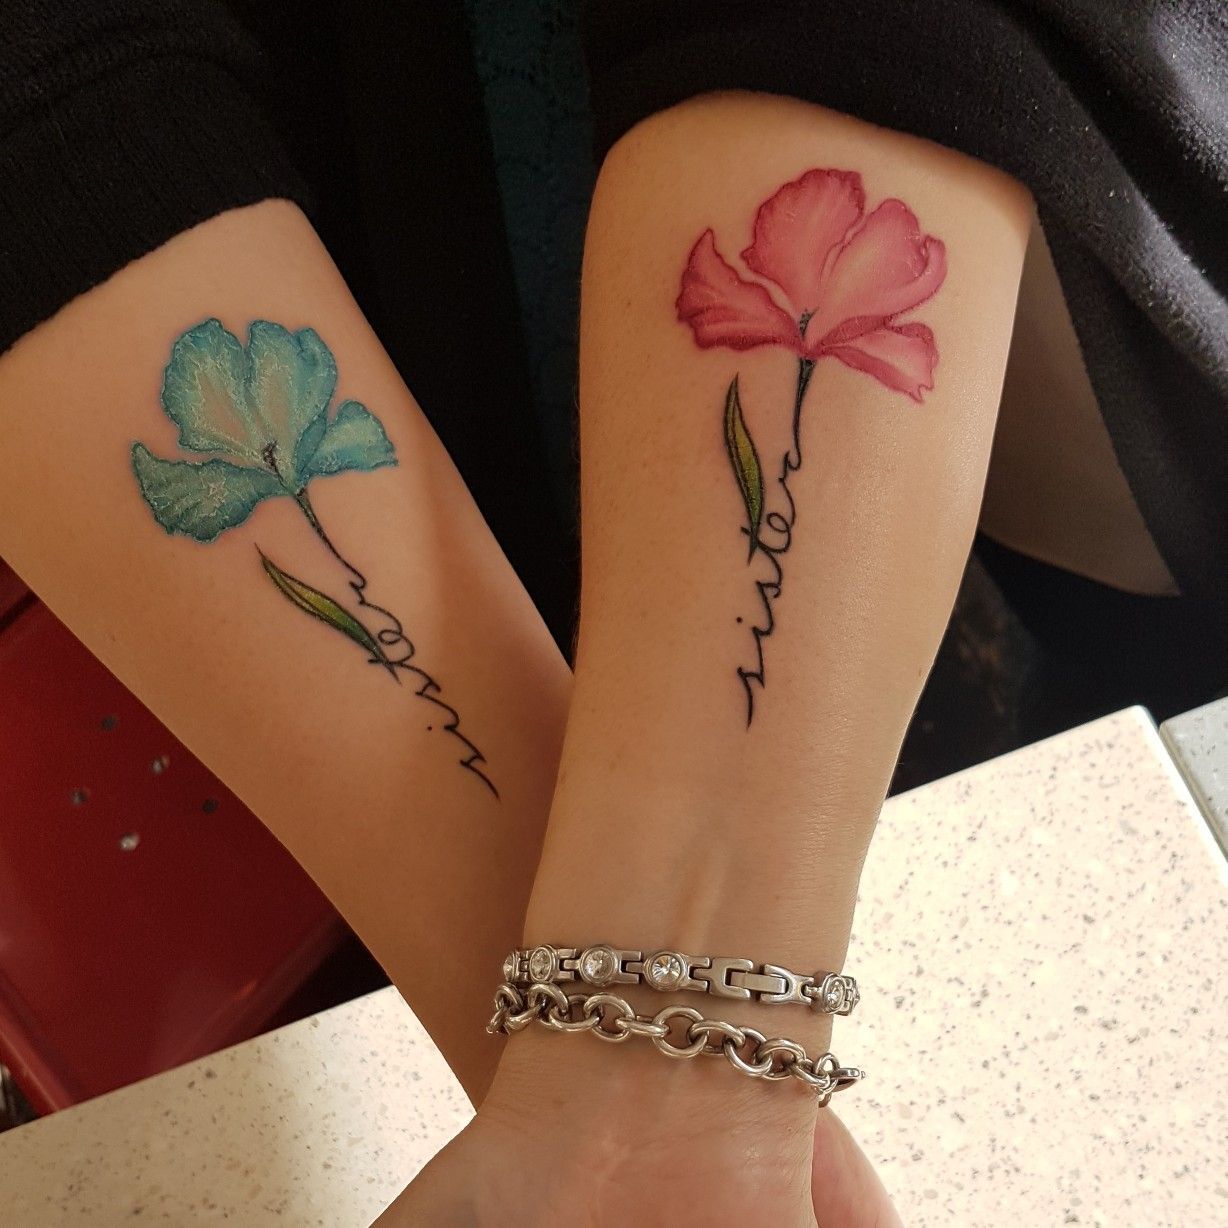 My new sister tattoo. I got the pink one and my sister blue. We got these done at Studio 21 in Las Vegas. -   23 sister tattoo kids
 ideas